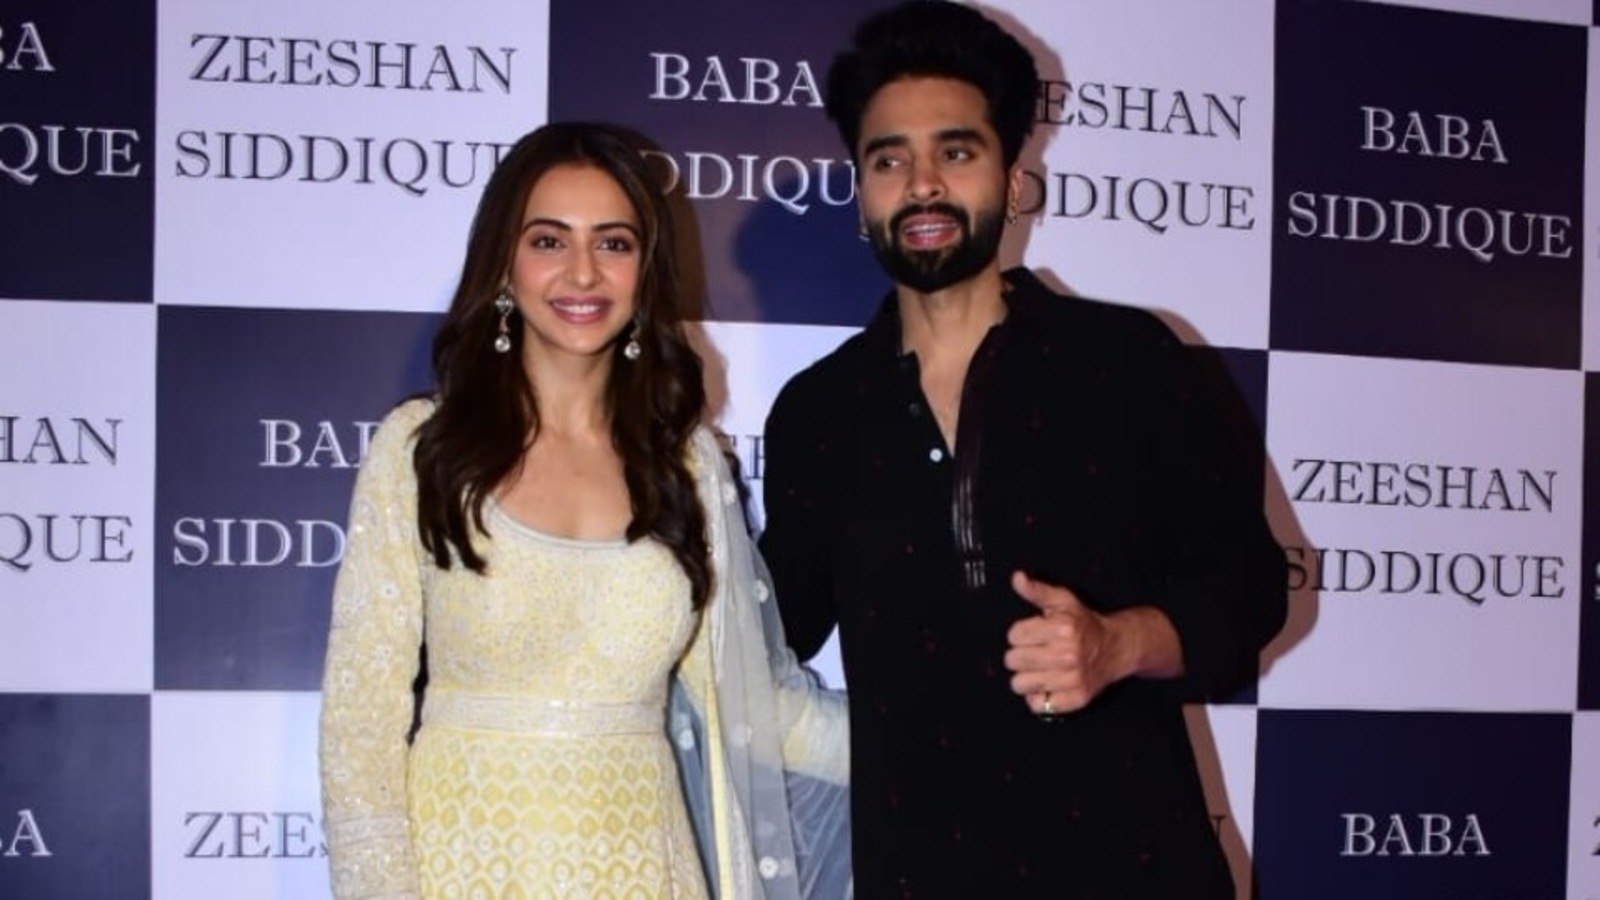 Rakul Preet Singh attends Baba Siddique’s Iftar party with Jackky Bhagnani in stunning anarkali: See pics, video